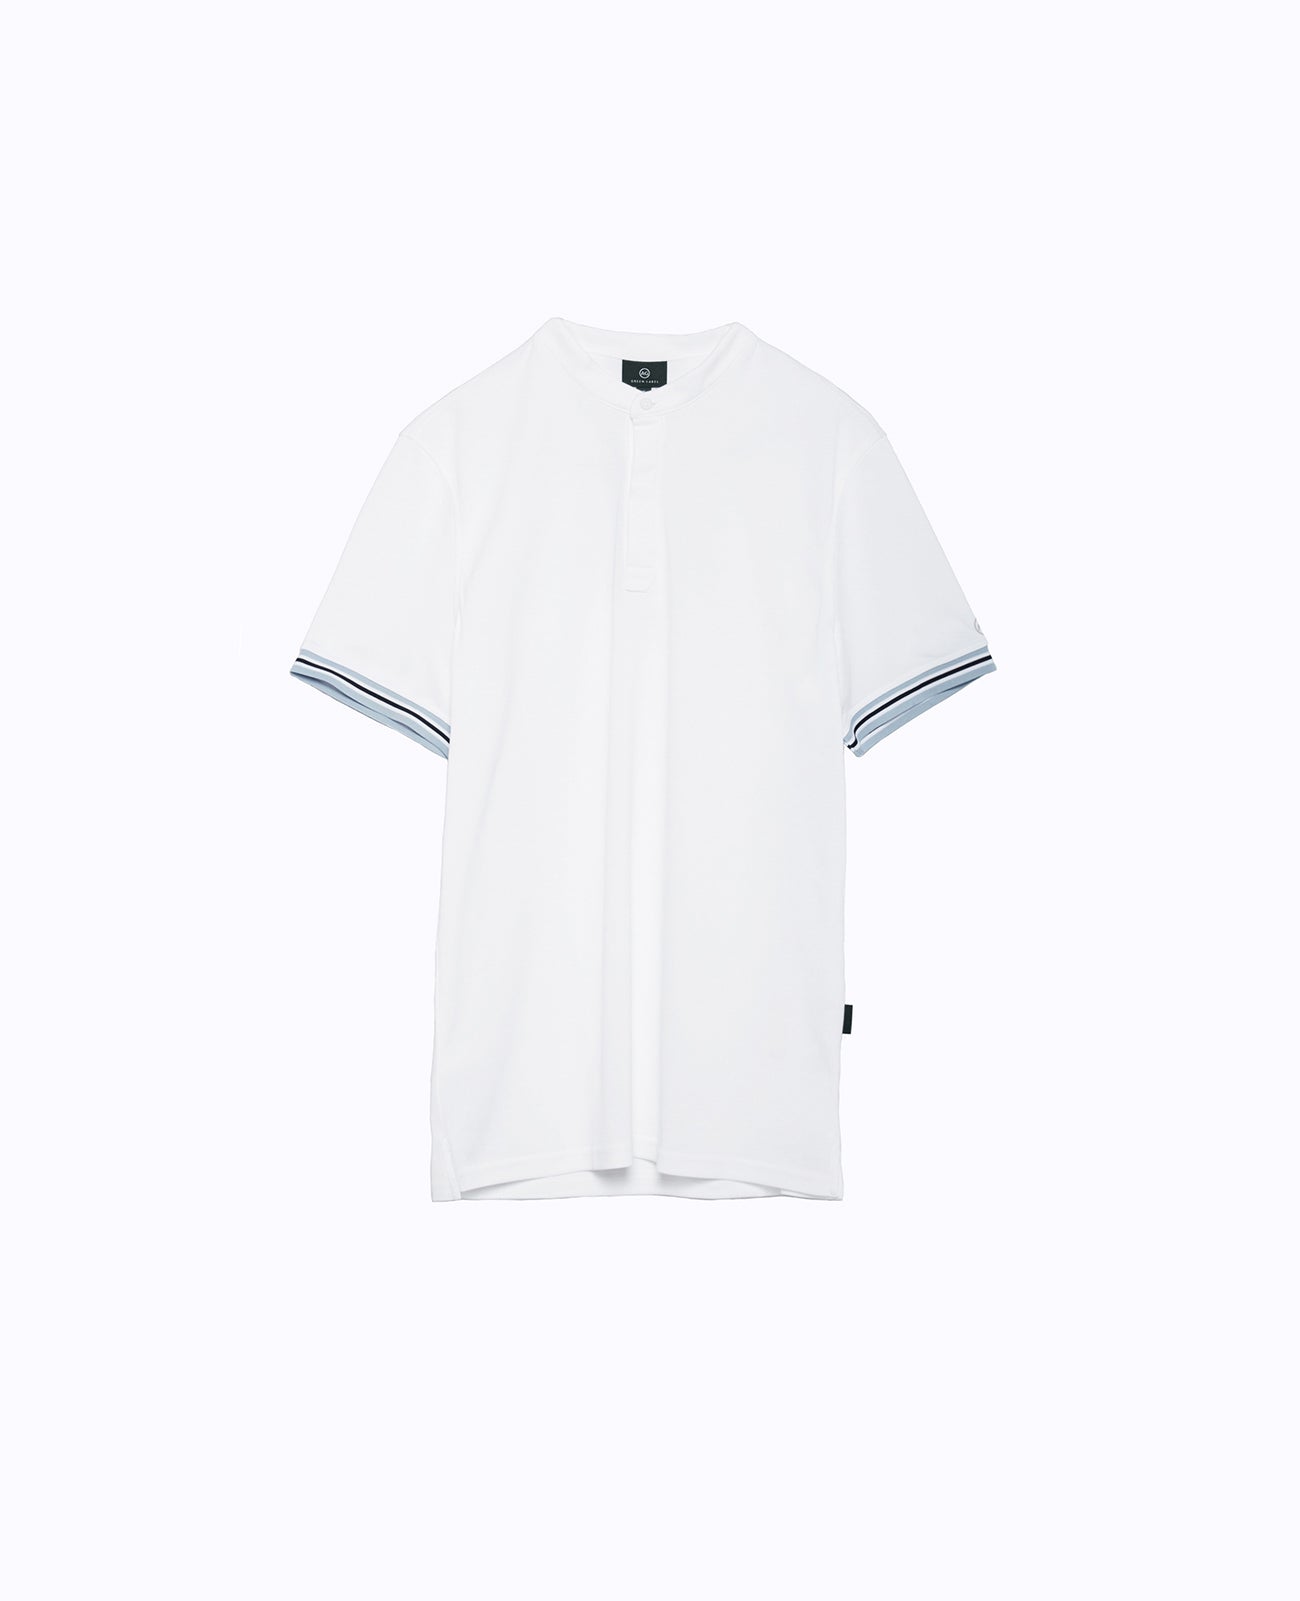 Haskett Polo Bright White Green Label Collection Men Tops Photo 6